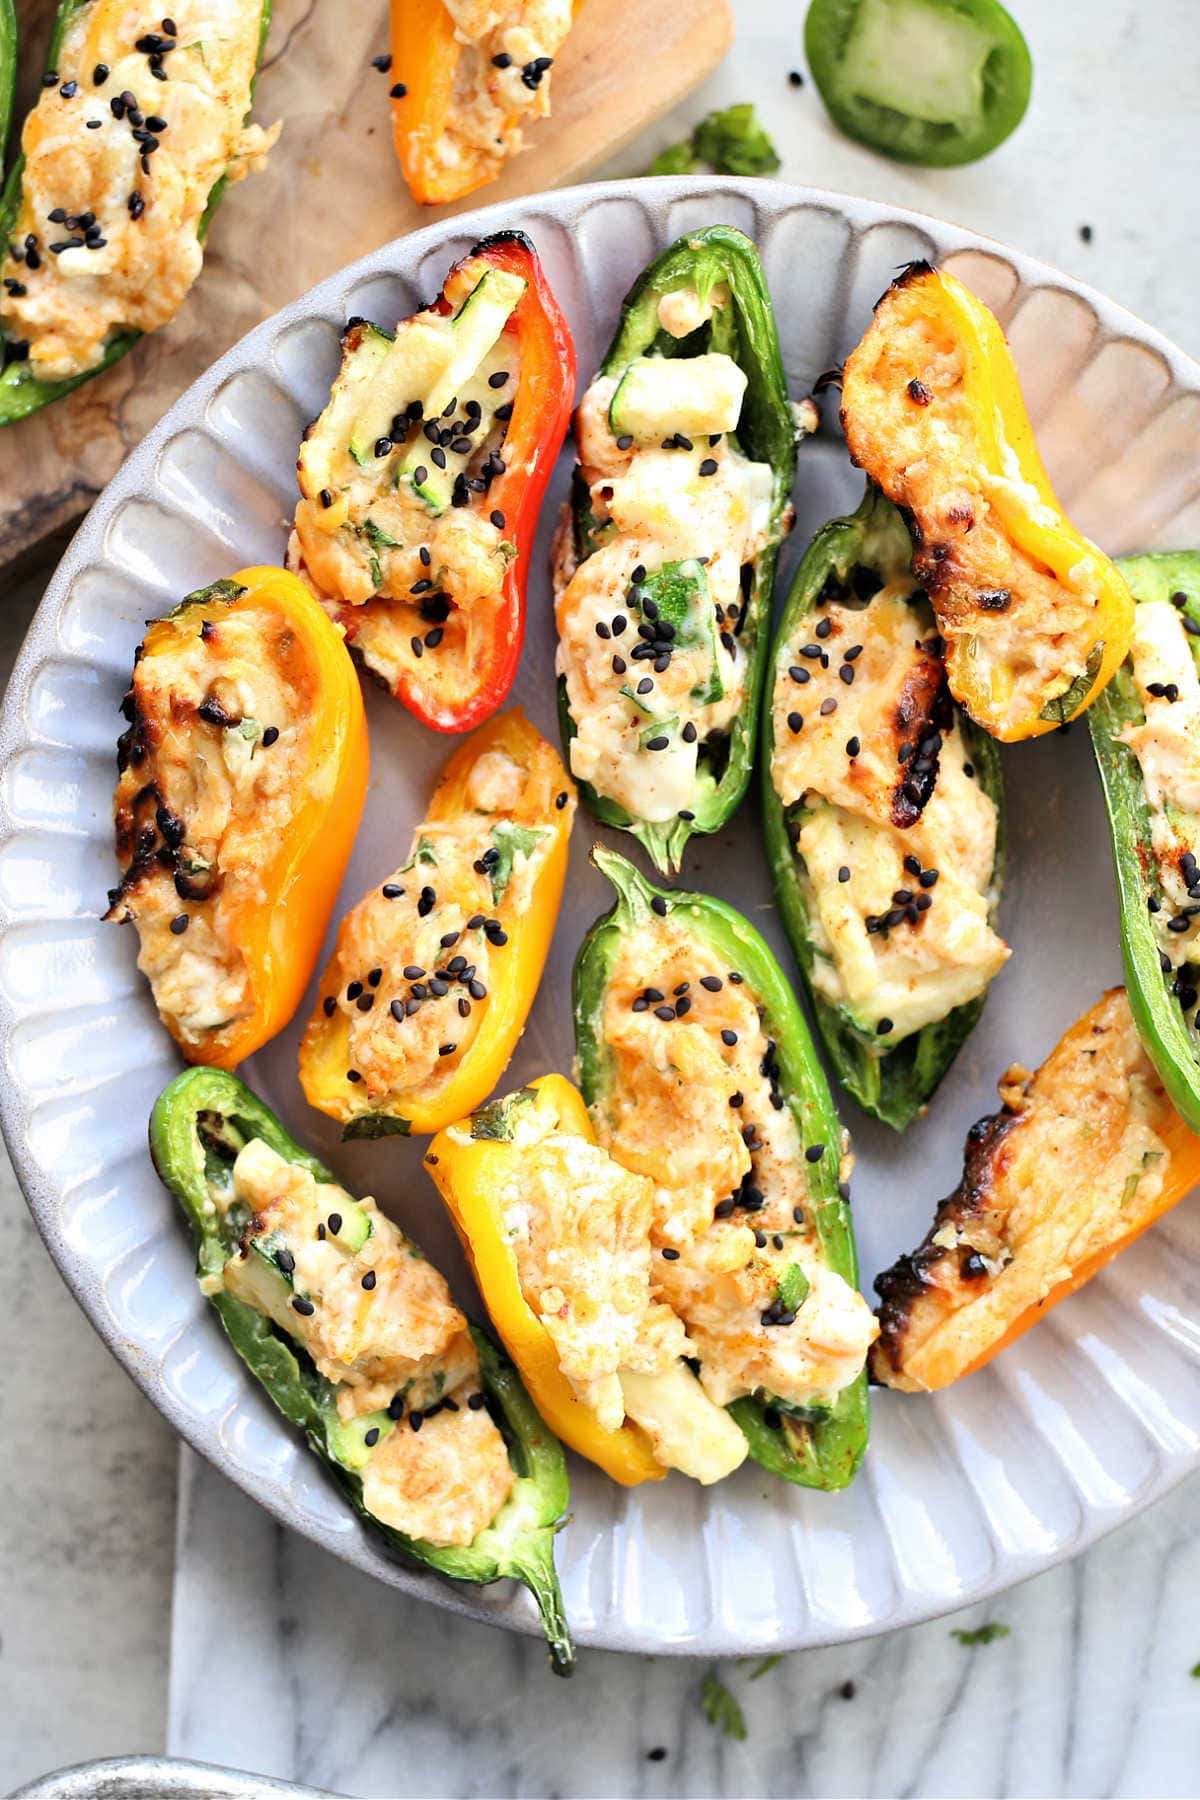 Grilled and cream cheese stuffed jalapeno peppers and sweet peppers on plate.